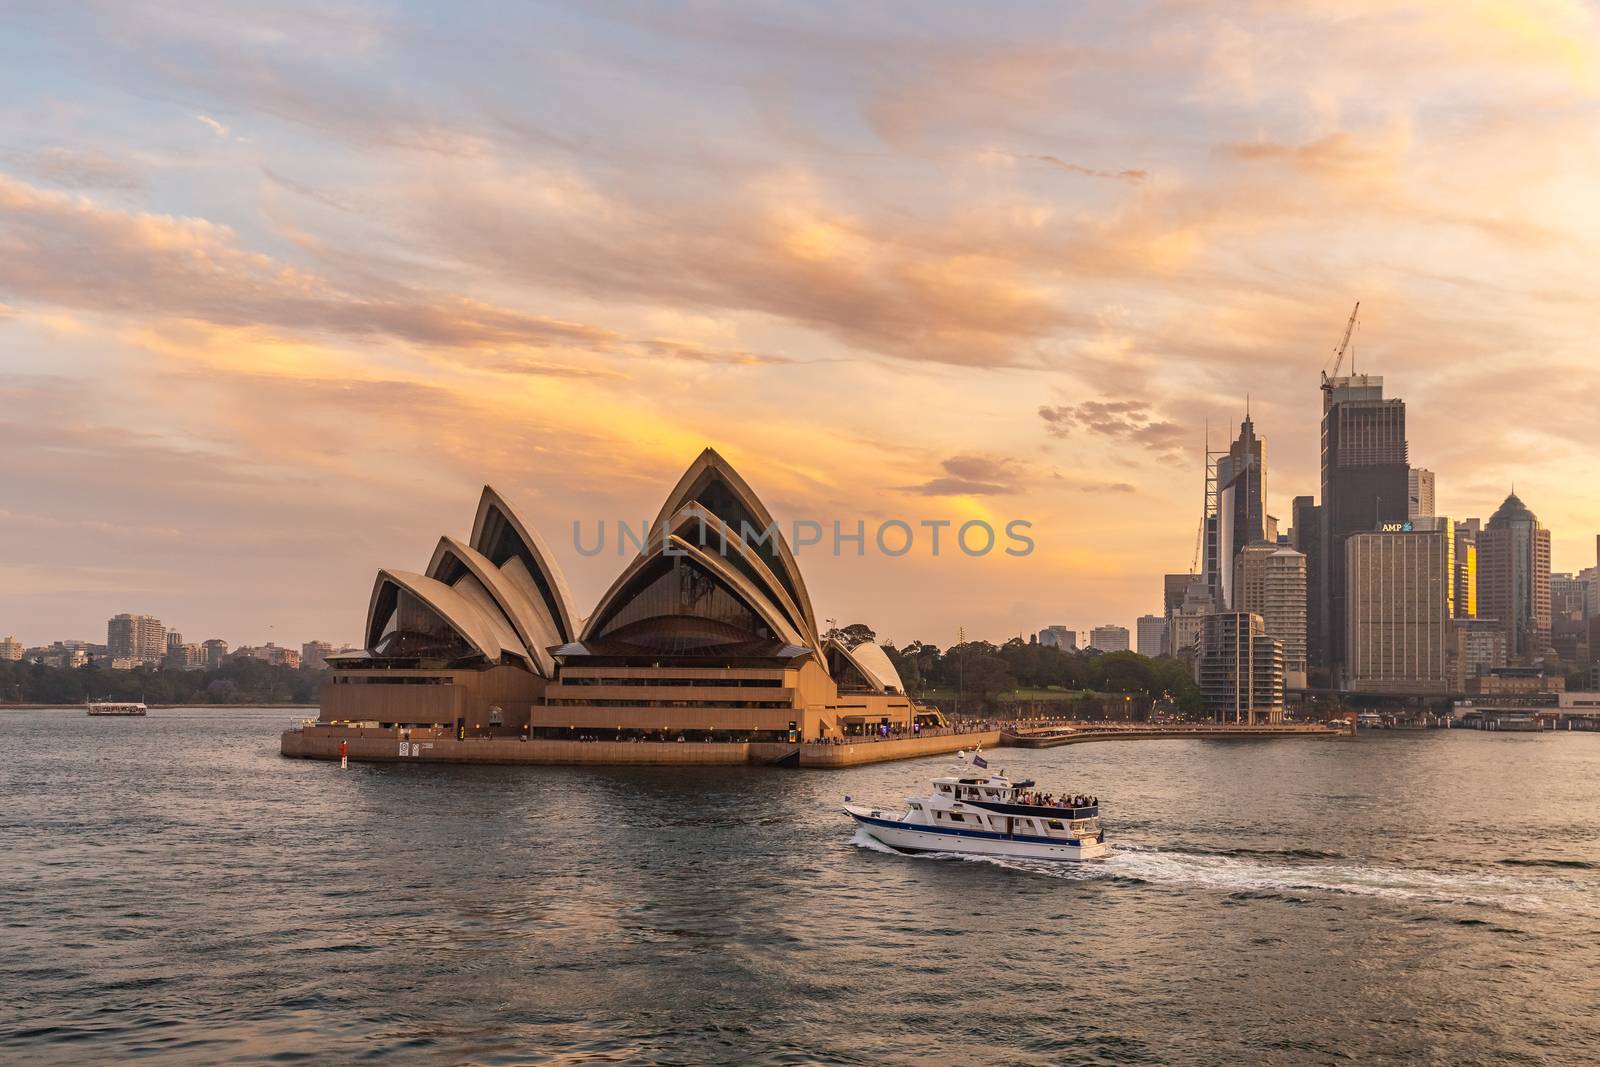 Sydney Opera House at sunset. Boat sailing by it by DamantisZ